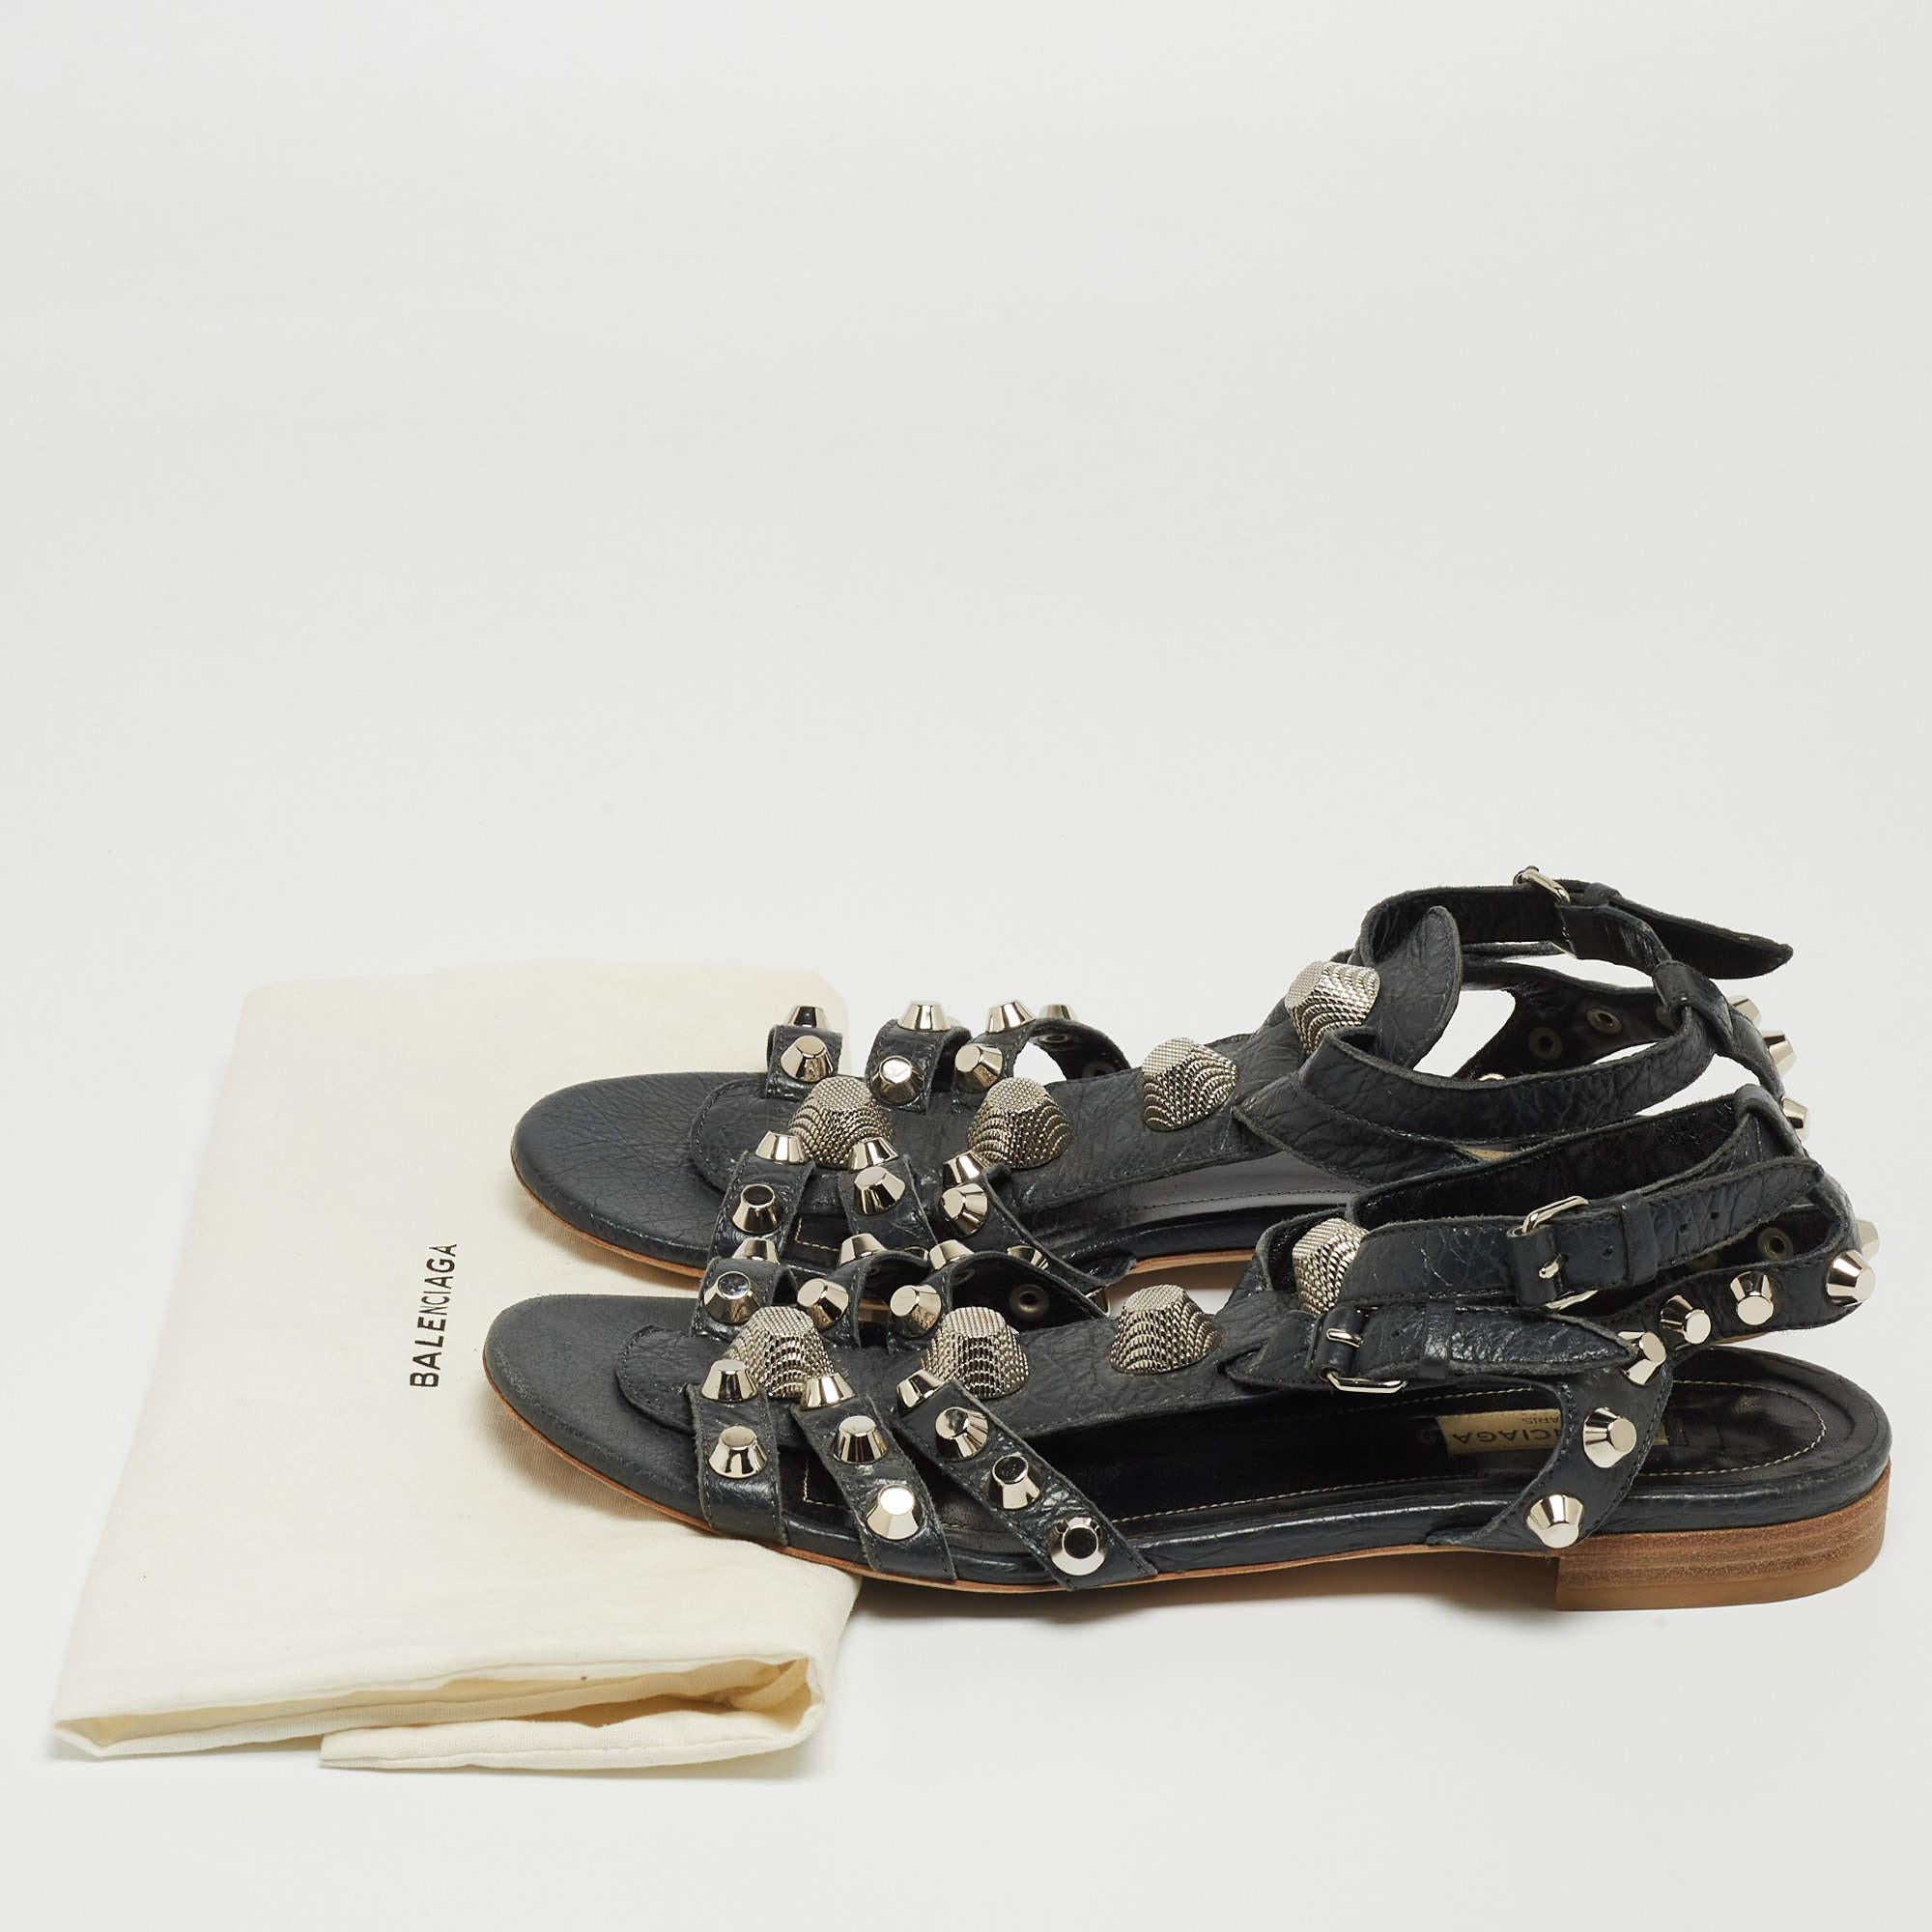 Balenciaga Dark Grey Leather Studded Ankle Strap Flat Sandals Size 39.5 For Sale 2